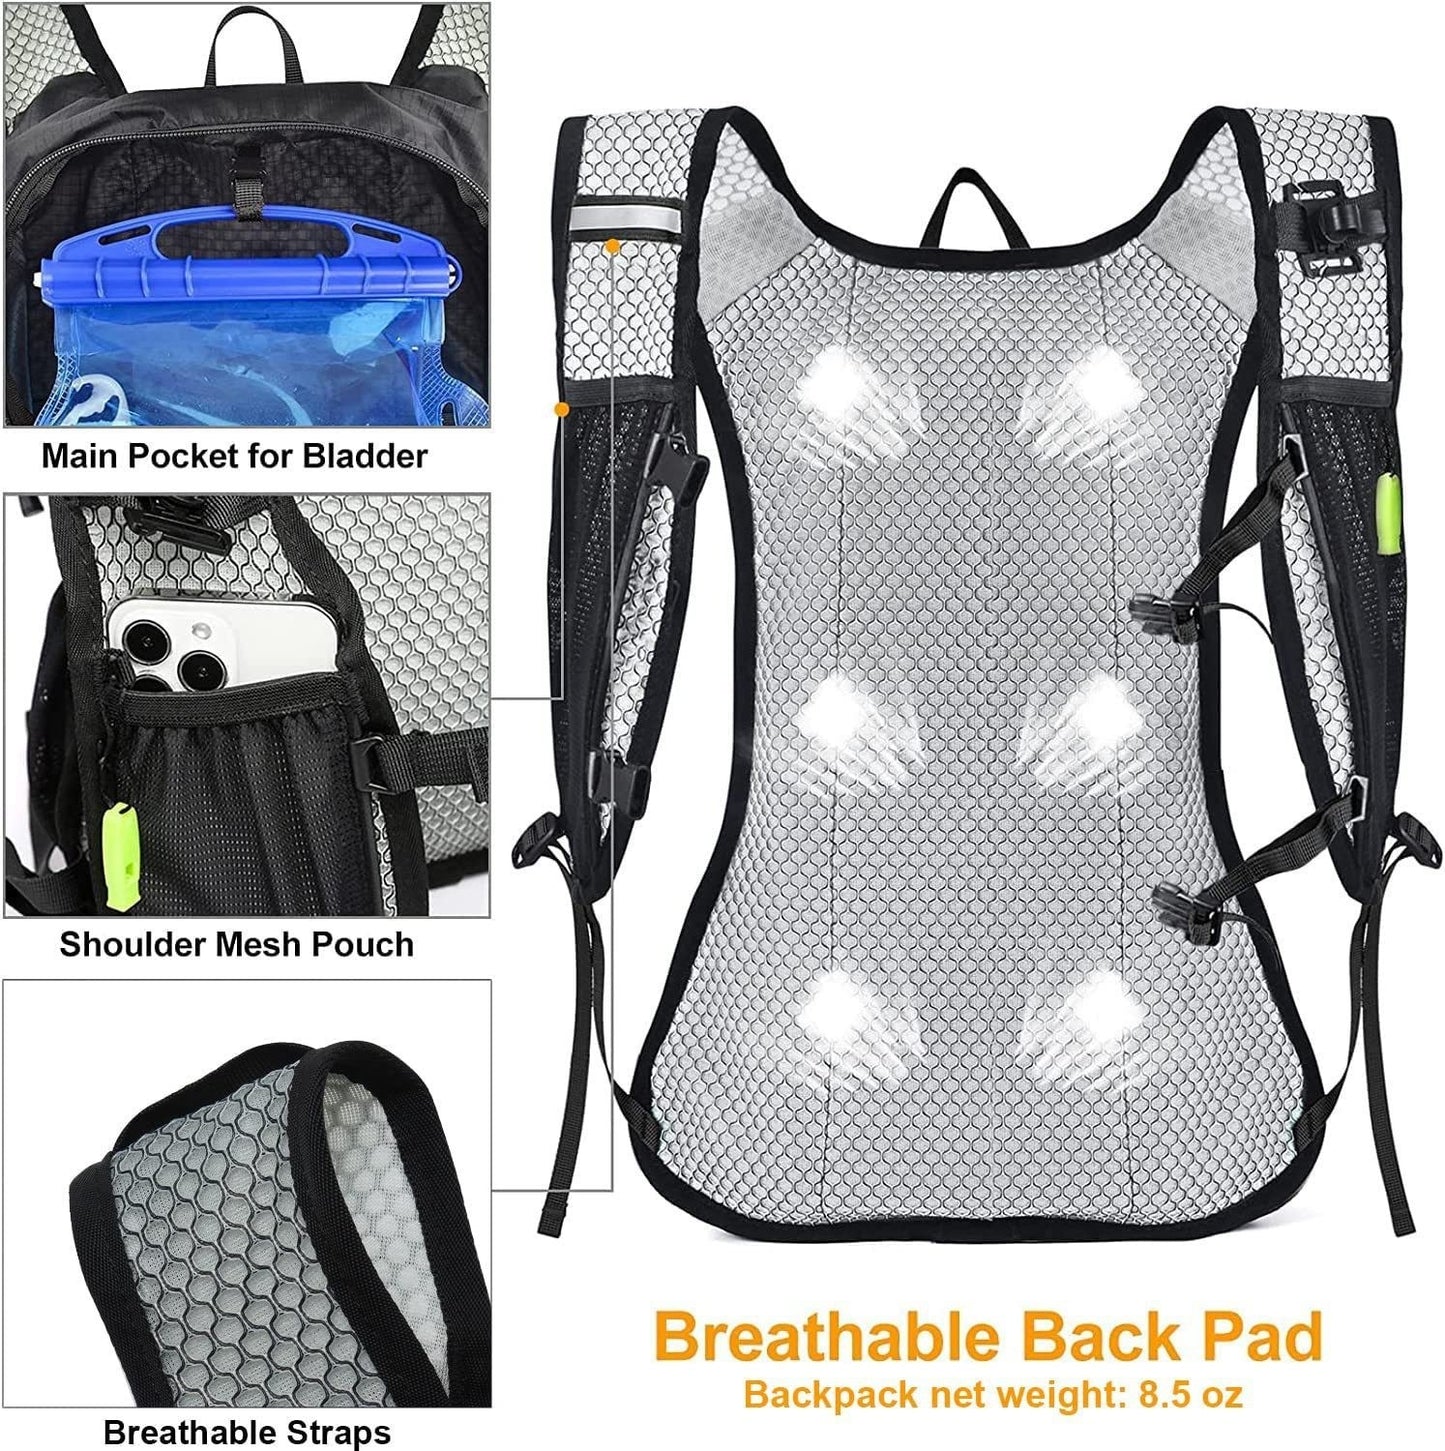 Oxford Cloth Backpack Ultra-Light Water Bag - Bargains4PenniesOxford Cloth Backpack Ultra-Light Water BagBargains4Pennies